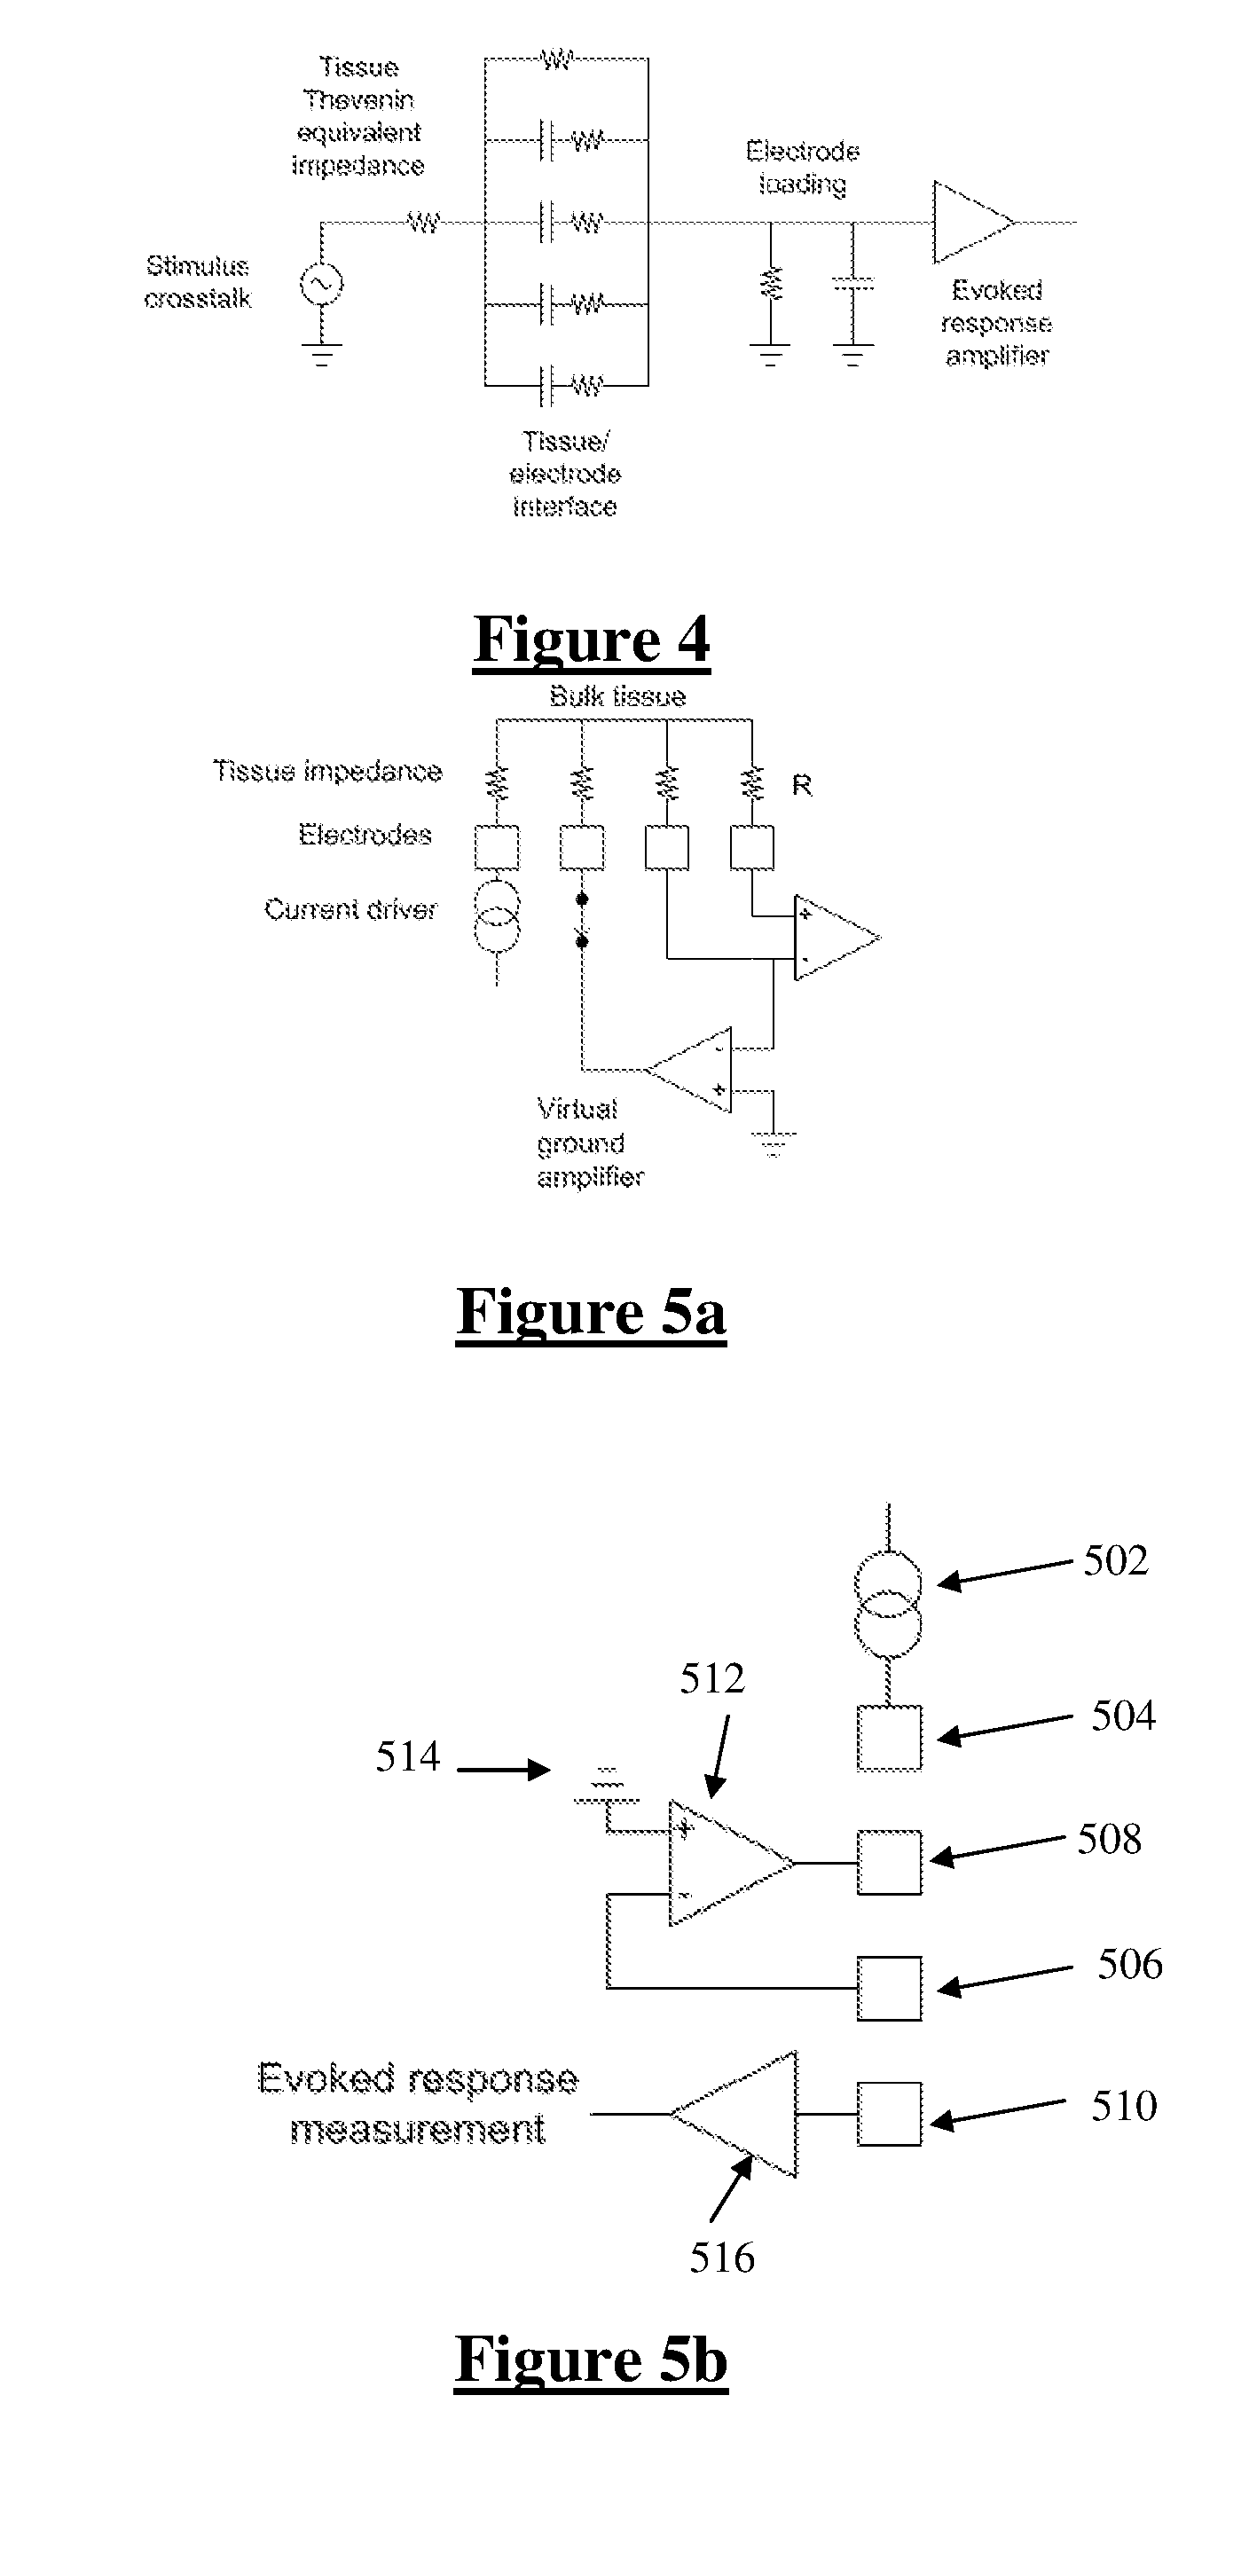 Method and System for Controlling Electrical Conditions of Tissue